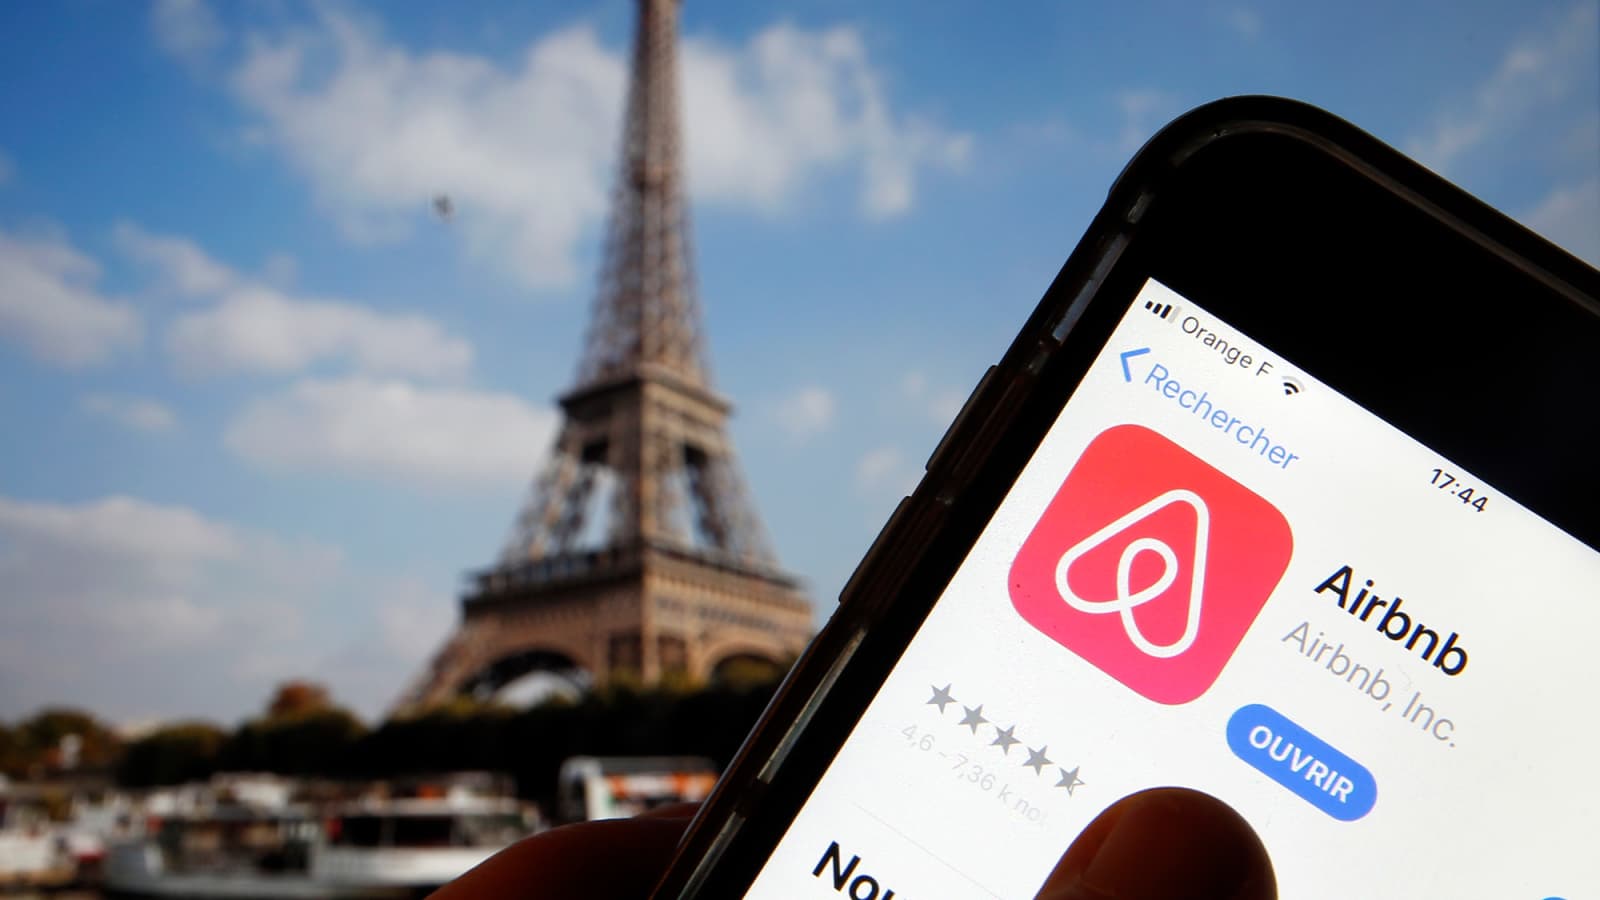 Airbnb wins legal victory from Europe's top court as it looks to IPO